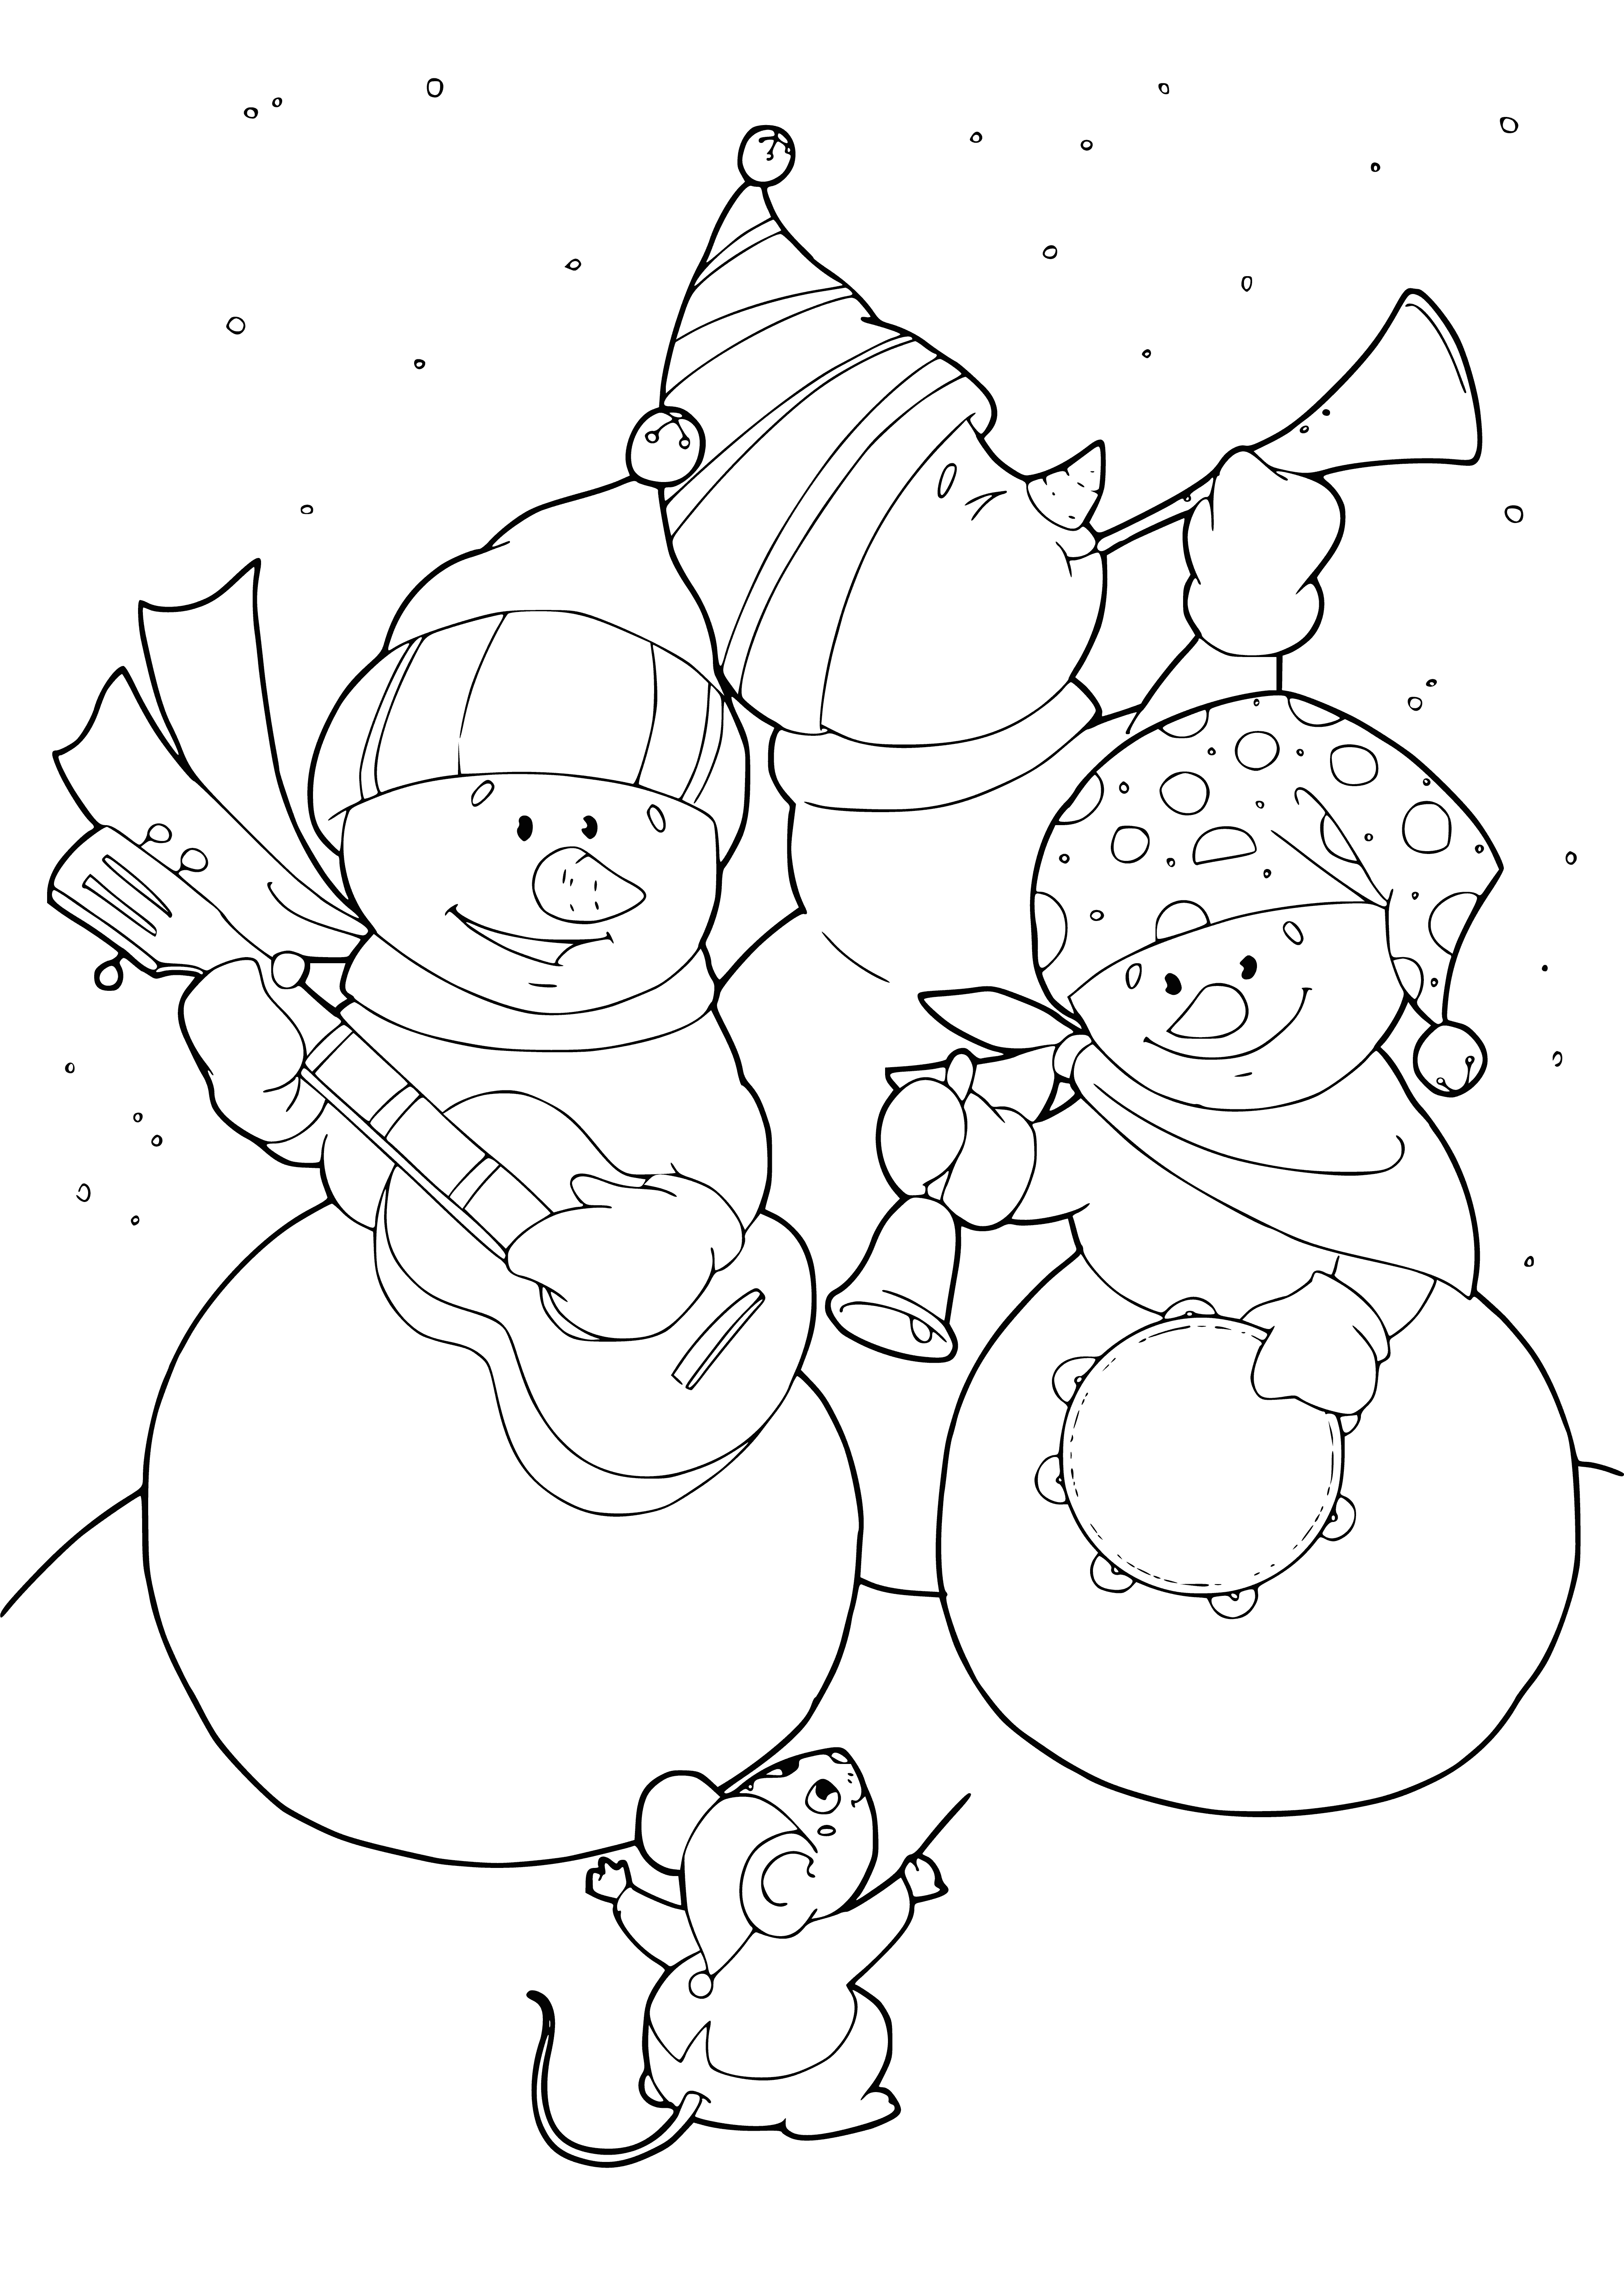 coloring page: Two snowmen, one small & one large-one stands on the other's head, each with coal eyes/nose/mouth & hat/scarf.